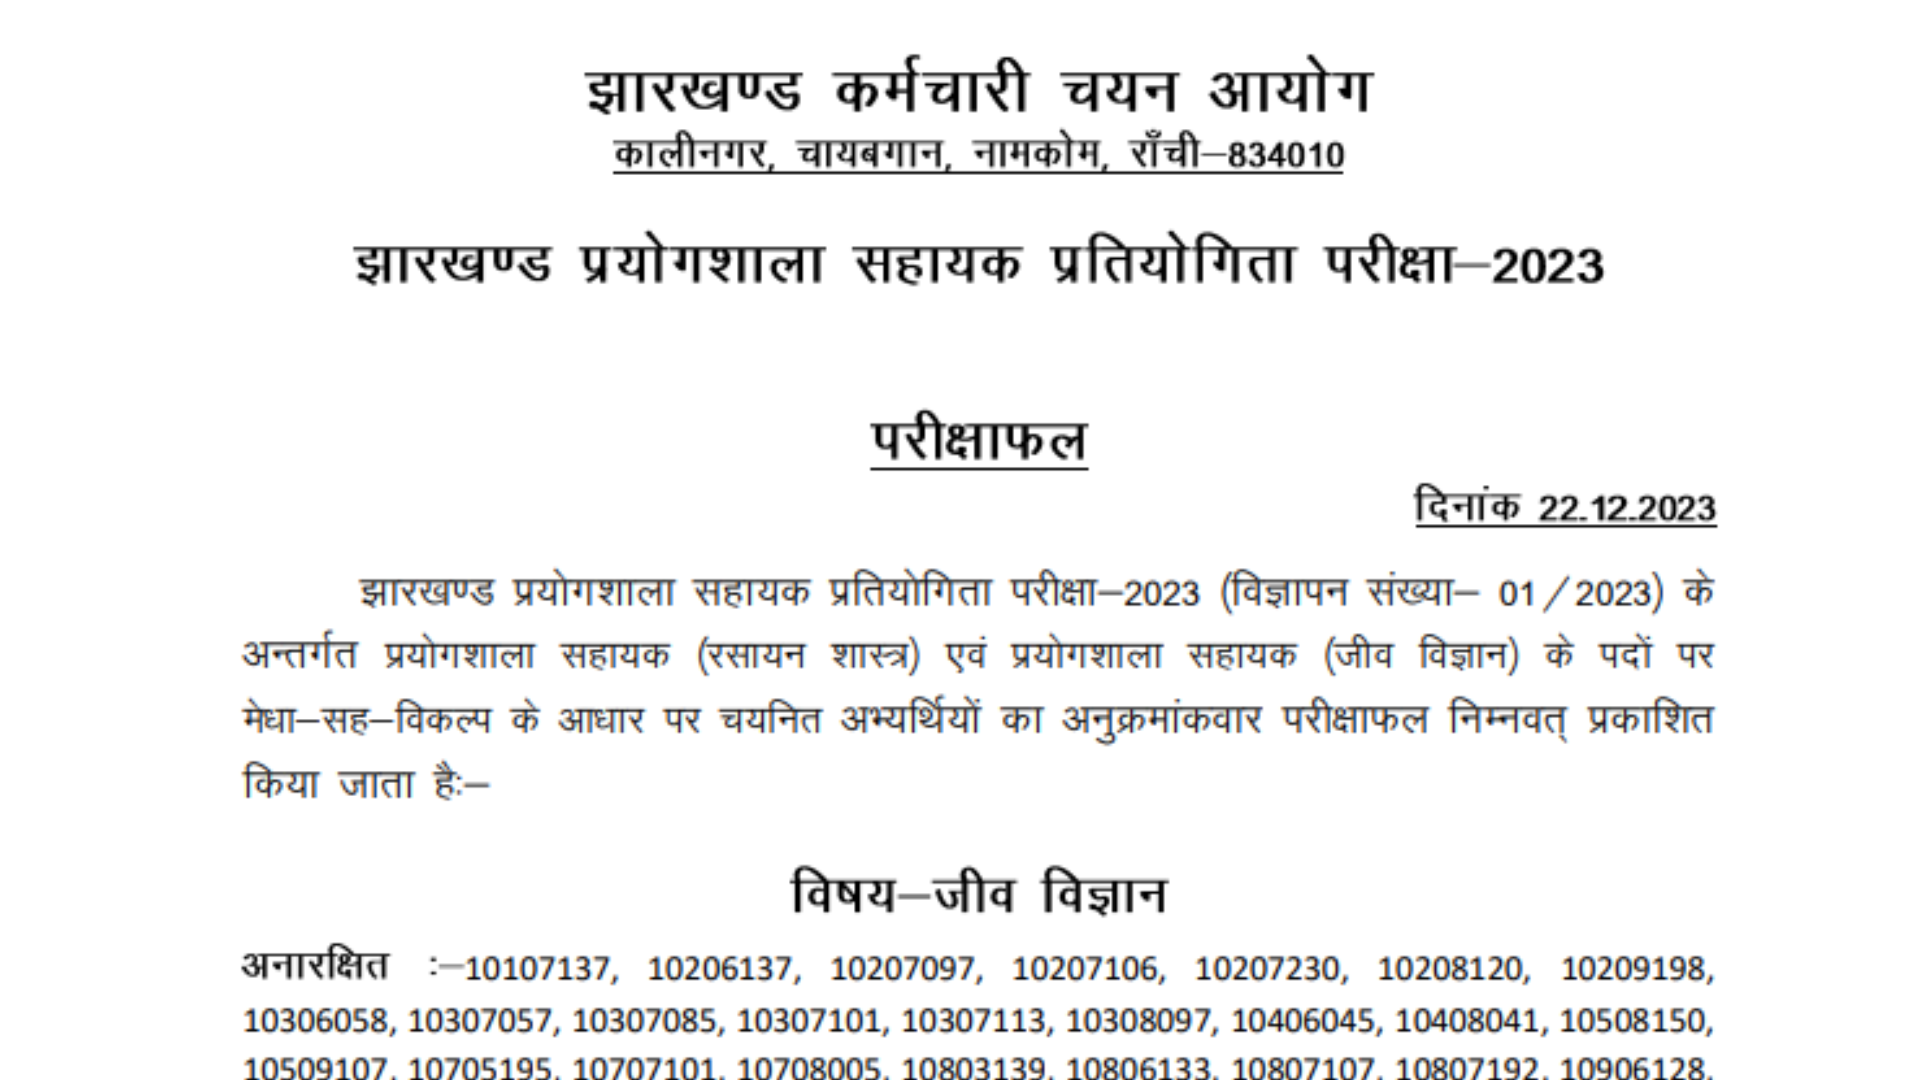 Jharkhand JSSC Laboratory Assistant Competitive Examination - JLACE 2023 Result for 630 Post